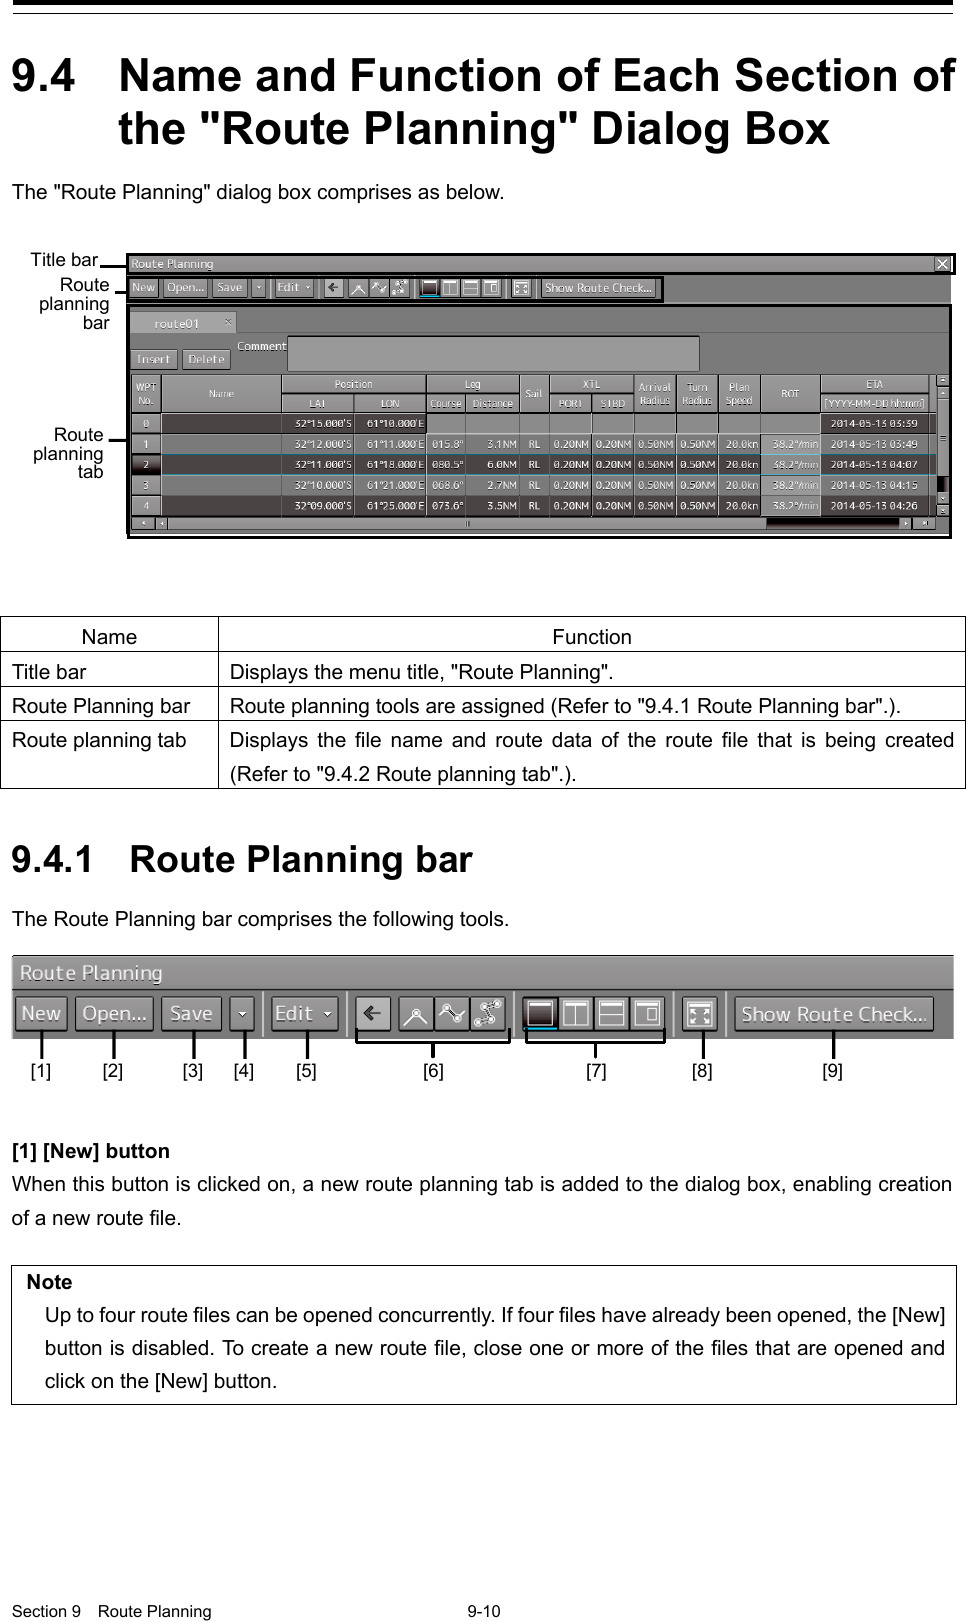  Section 9  Route Planning  9-10  9.4  Name and Function of Each Section of the &quot;Route Planning&quot; Dialog Box The &quot;Route Planning&quot; dialog box comprises as below.   Name Function Title bar Displays the menu title, &quot;Route Planning&quot;. Route Planning bar Route planning tools are assigned (Refer to &quot;9.4.1 Route Planning bar&quot;.). Route planning tab Displays the file name and route data of the route file that is being created (Refer to &quot;9.4.2 Route planning tab&quot;.).   9.4.1 Route Planning bar The Route Planning bar comprises the following tools.    [1] [New] button When this button is clicked on, a new route planning tab is added to the dialog box, enabling creation of a new route file.  Note Up to four route files can be opened concurrently. If four files have already been opened, the [New] button is disabled. To create a new route file, close one or more of the files that are opened and click on the [New] button.       Title bar   Route planning bar   Route planning tab  [6] [7] [1] [2] [3] [4] [5] [8] [9] 